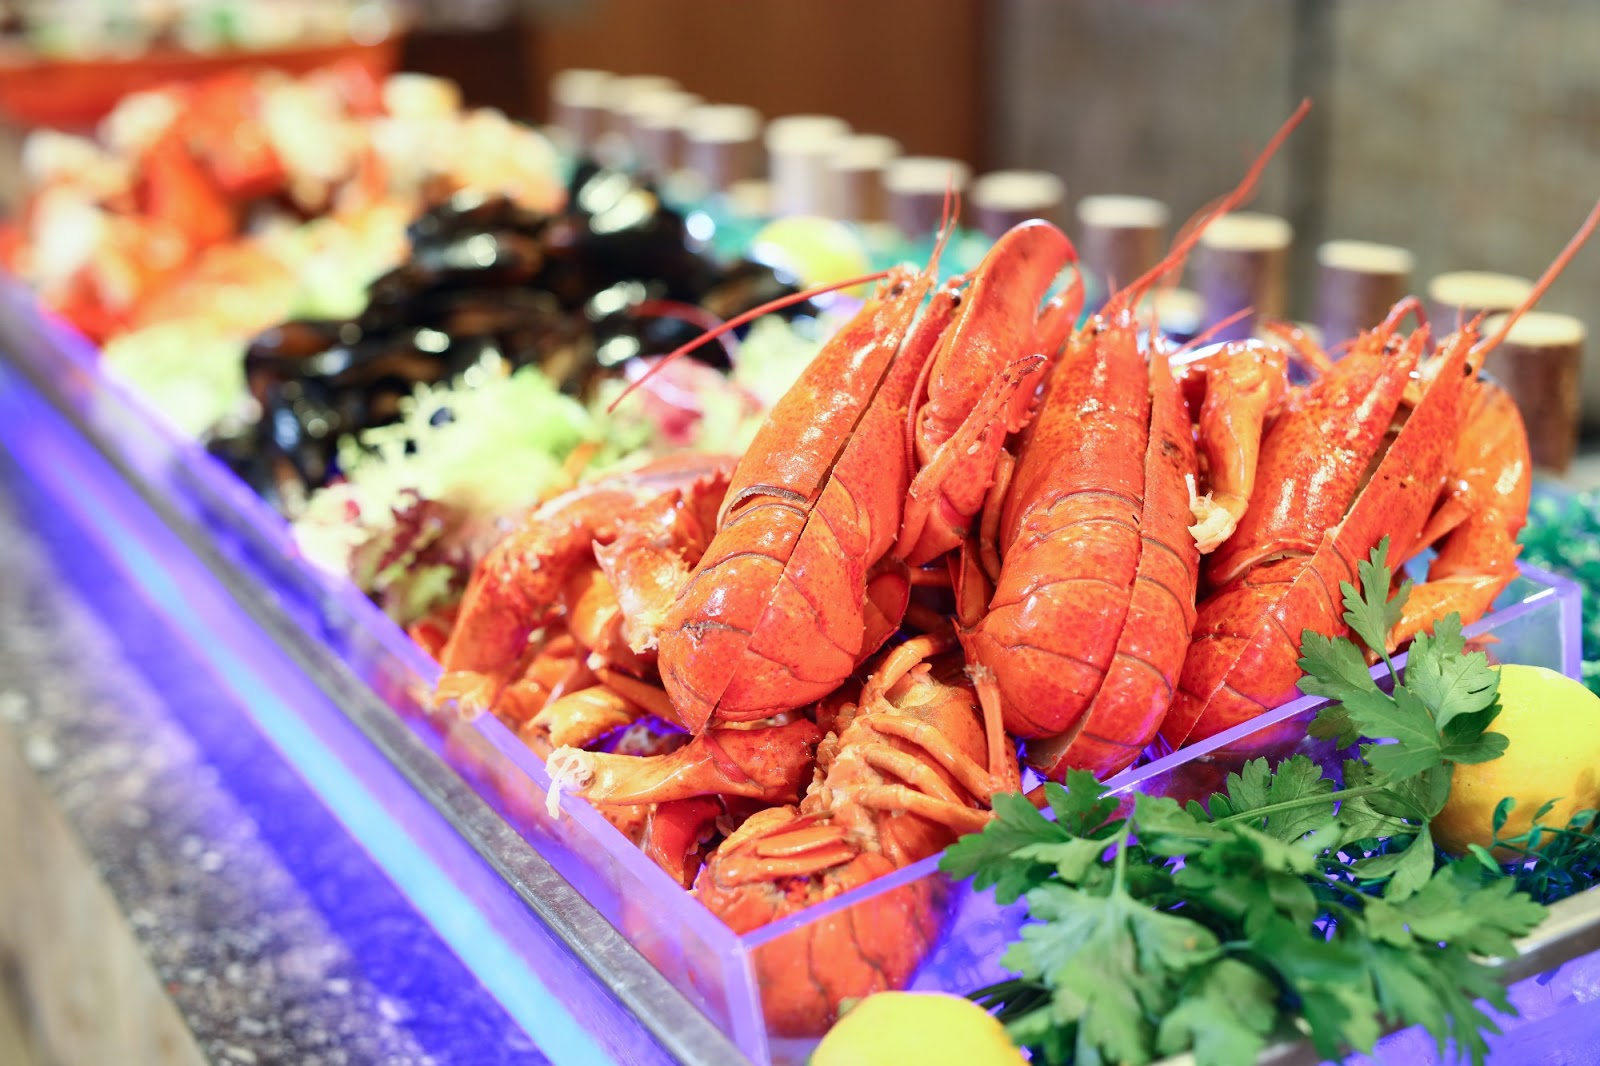 ADDPRINCE PRESENTS LOBSTER FEAST AND SIGNATURE CHEESECAKE AFTERNOON